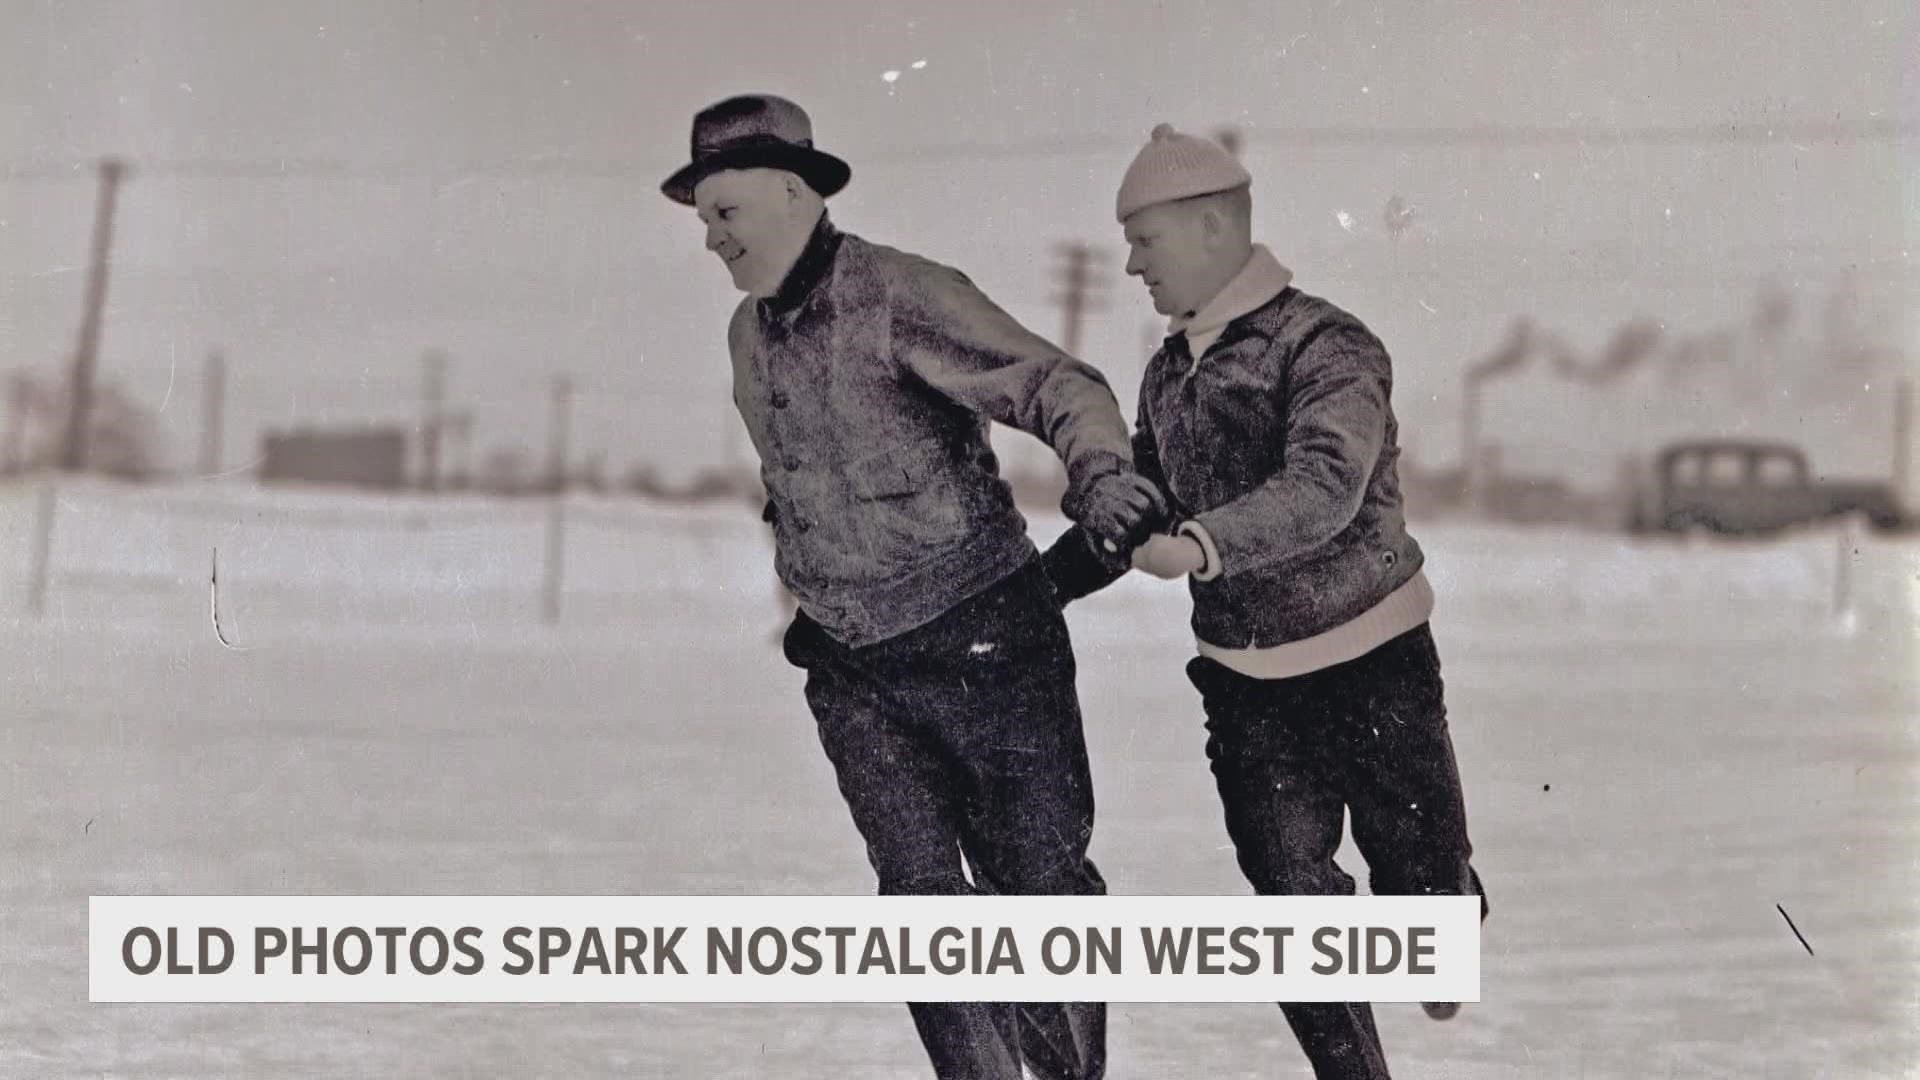 Nostalgia is something that brings all of us together, and a local Facebook page that celebrates Grand Rapids' West Side is getting a lot of attention for it.